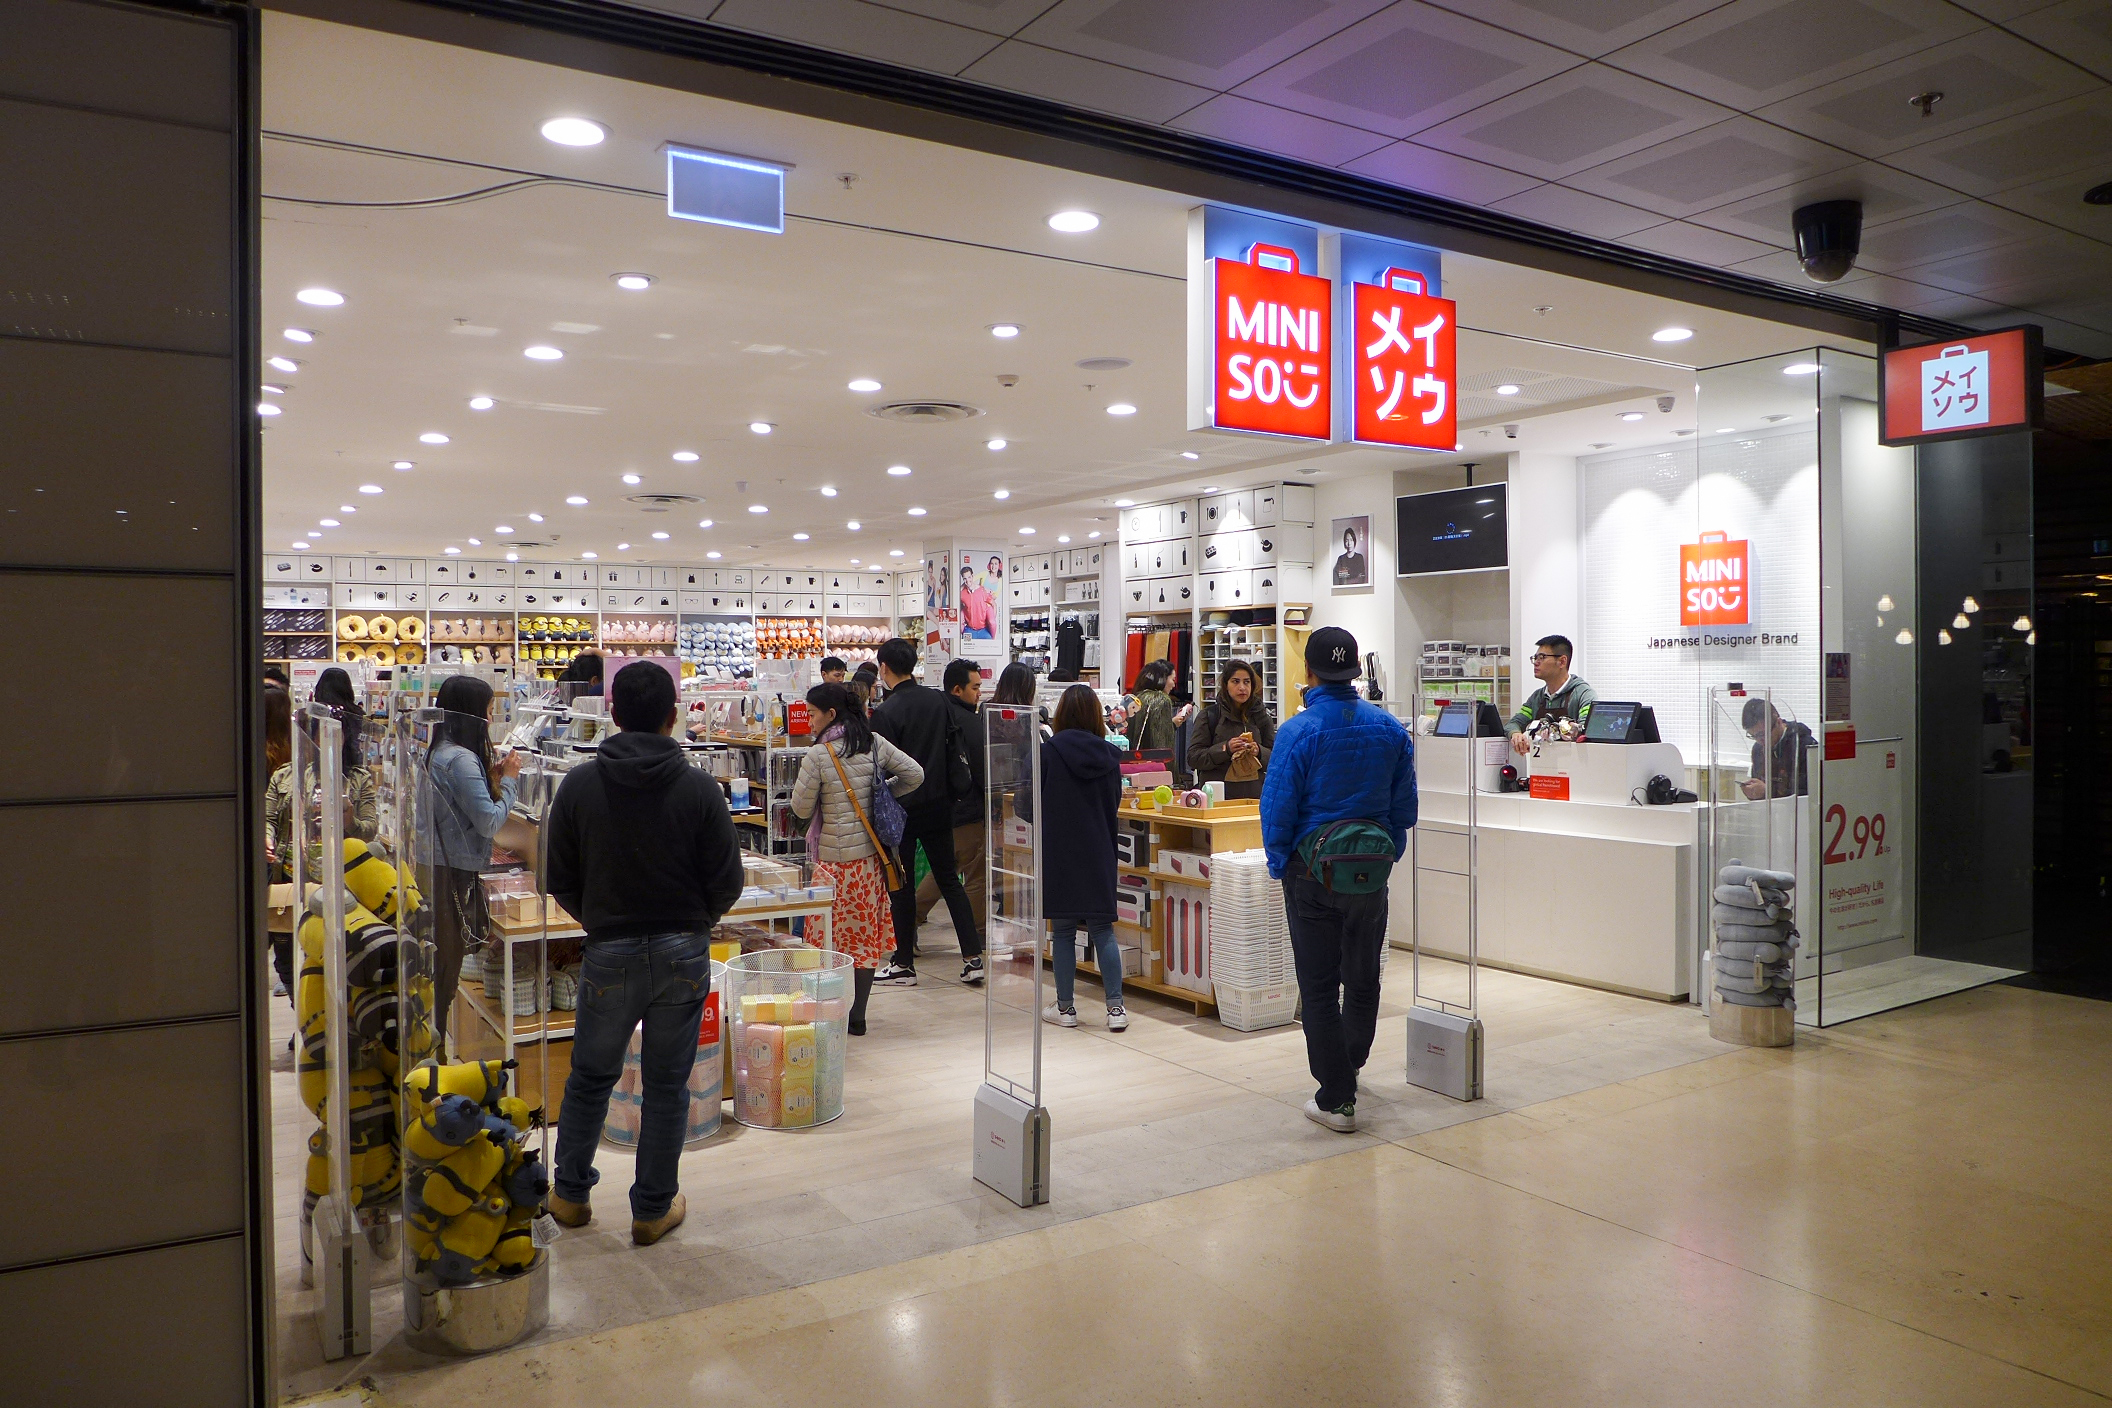 Miniso Announces its transformation to a New Retail Platform